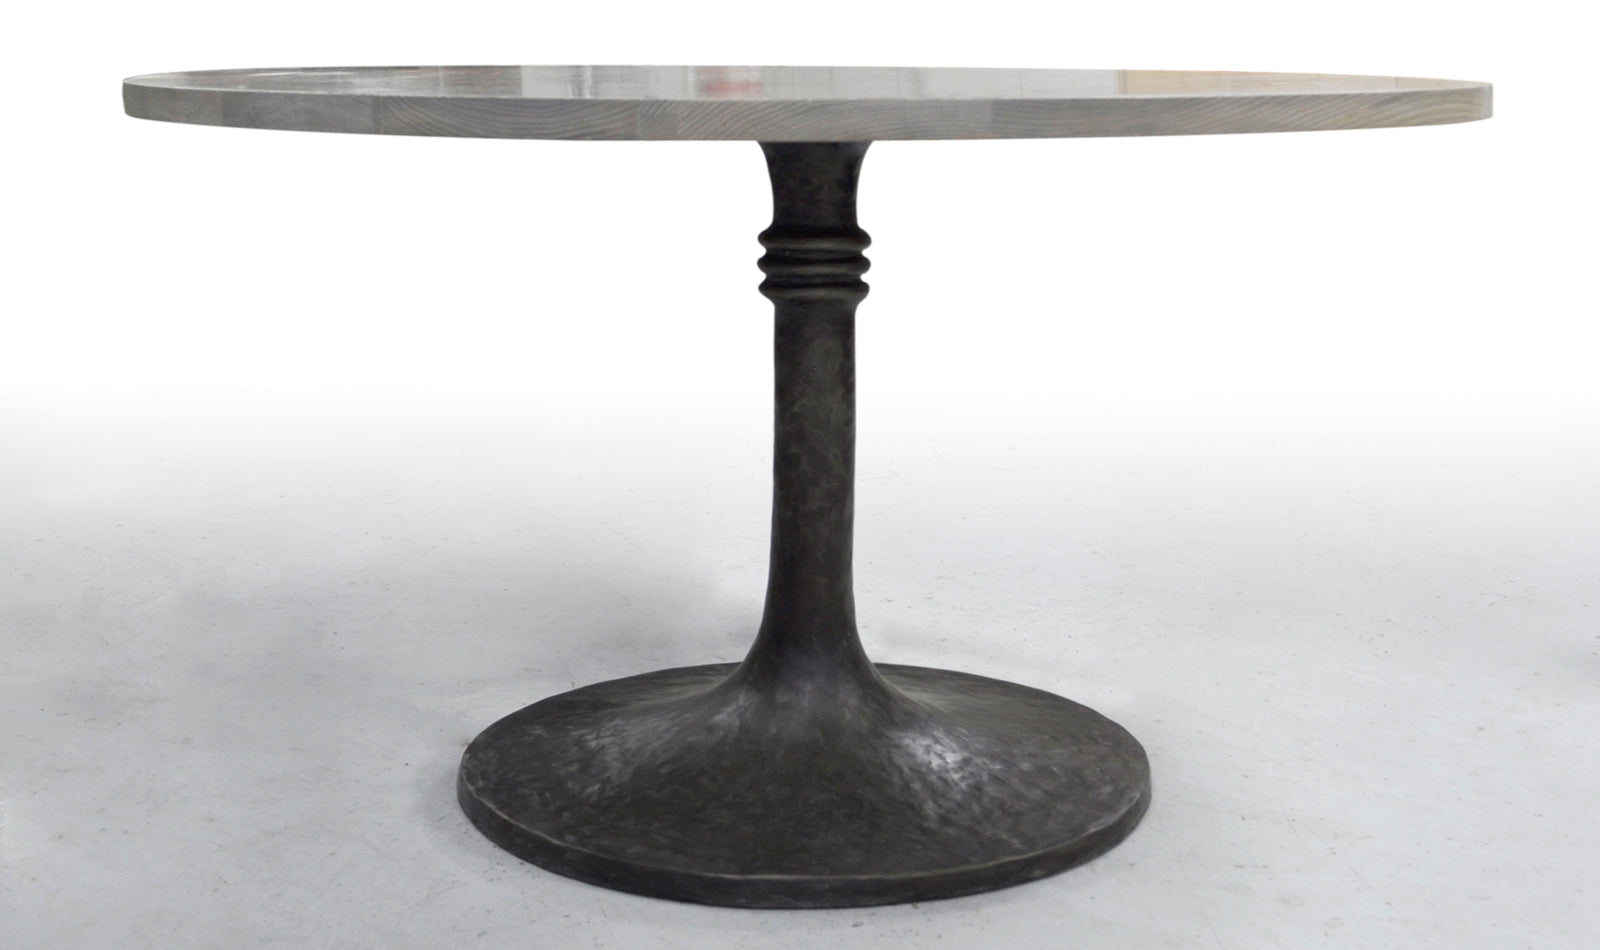 THE WILLOWOOD BRONZE TABLE